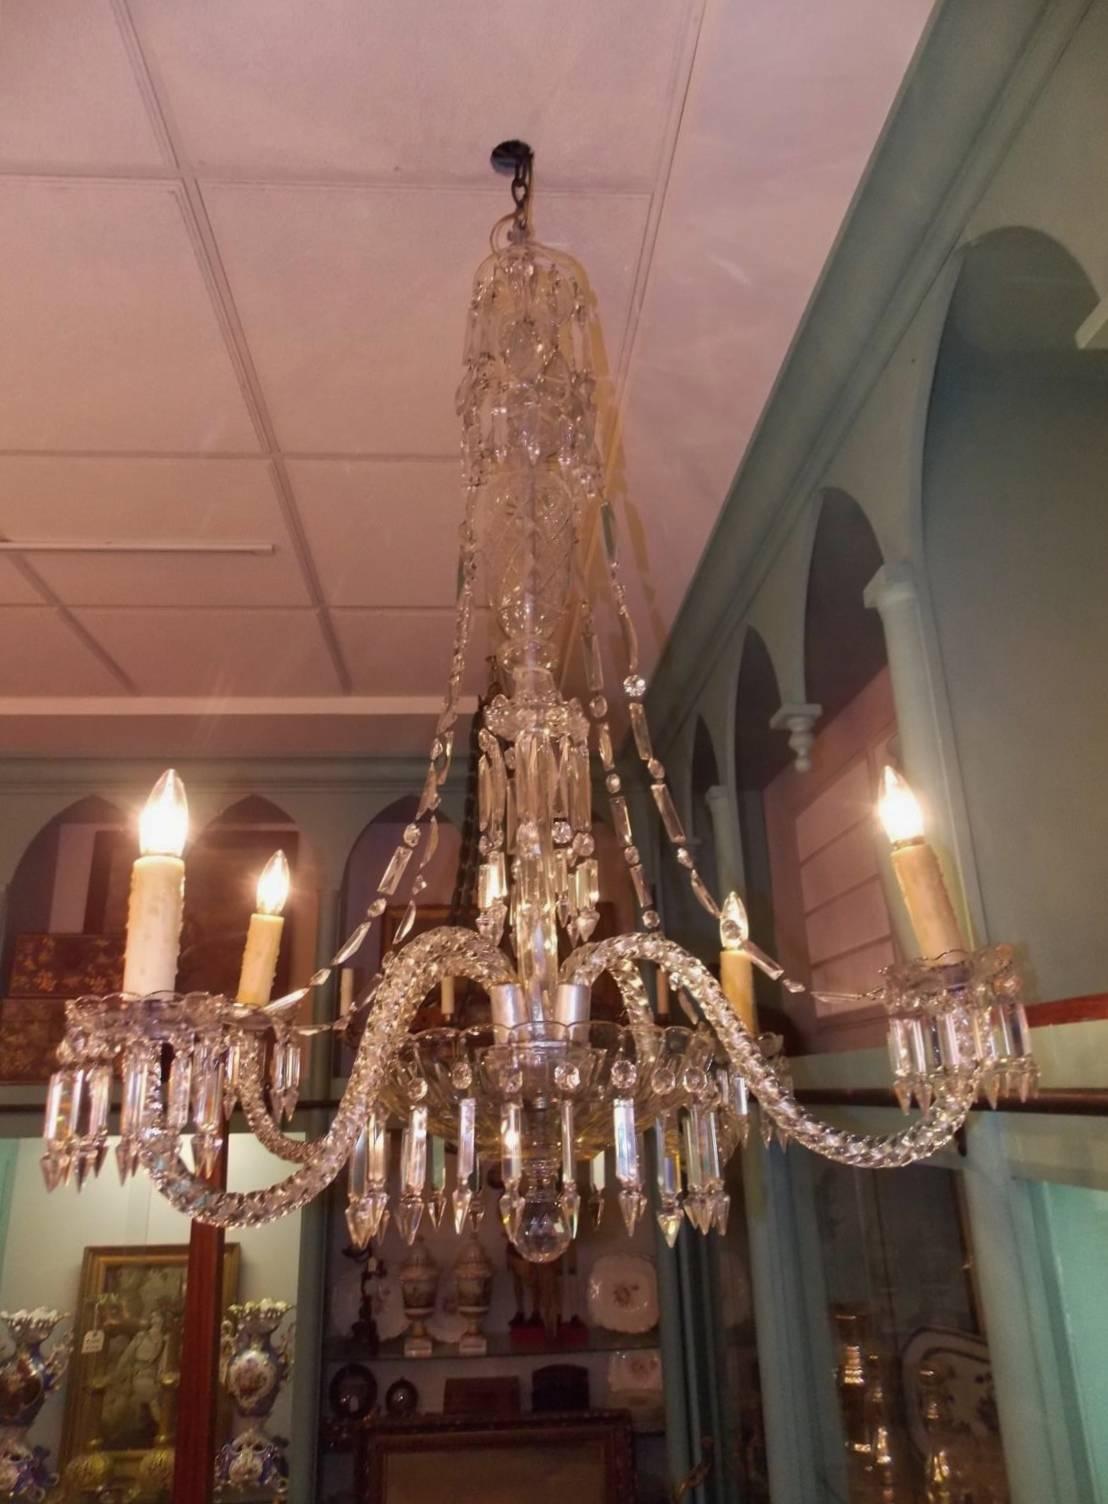 English cut crystal water fall chandelier with a centered bulbous crystal column, four scrolled spiral arms, cascading connecting prisms, and terminating with a large cut crystal bowl and faceted ball finial. Late 19th Century. Chandelier was